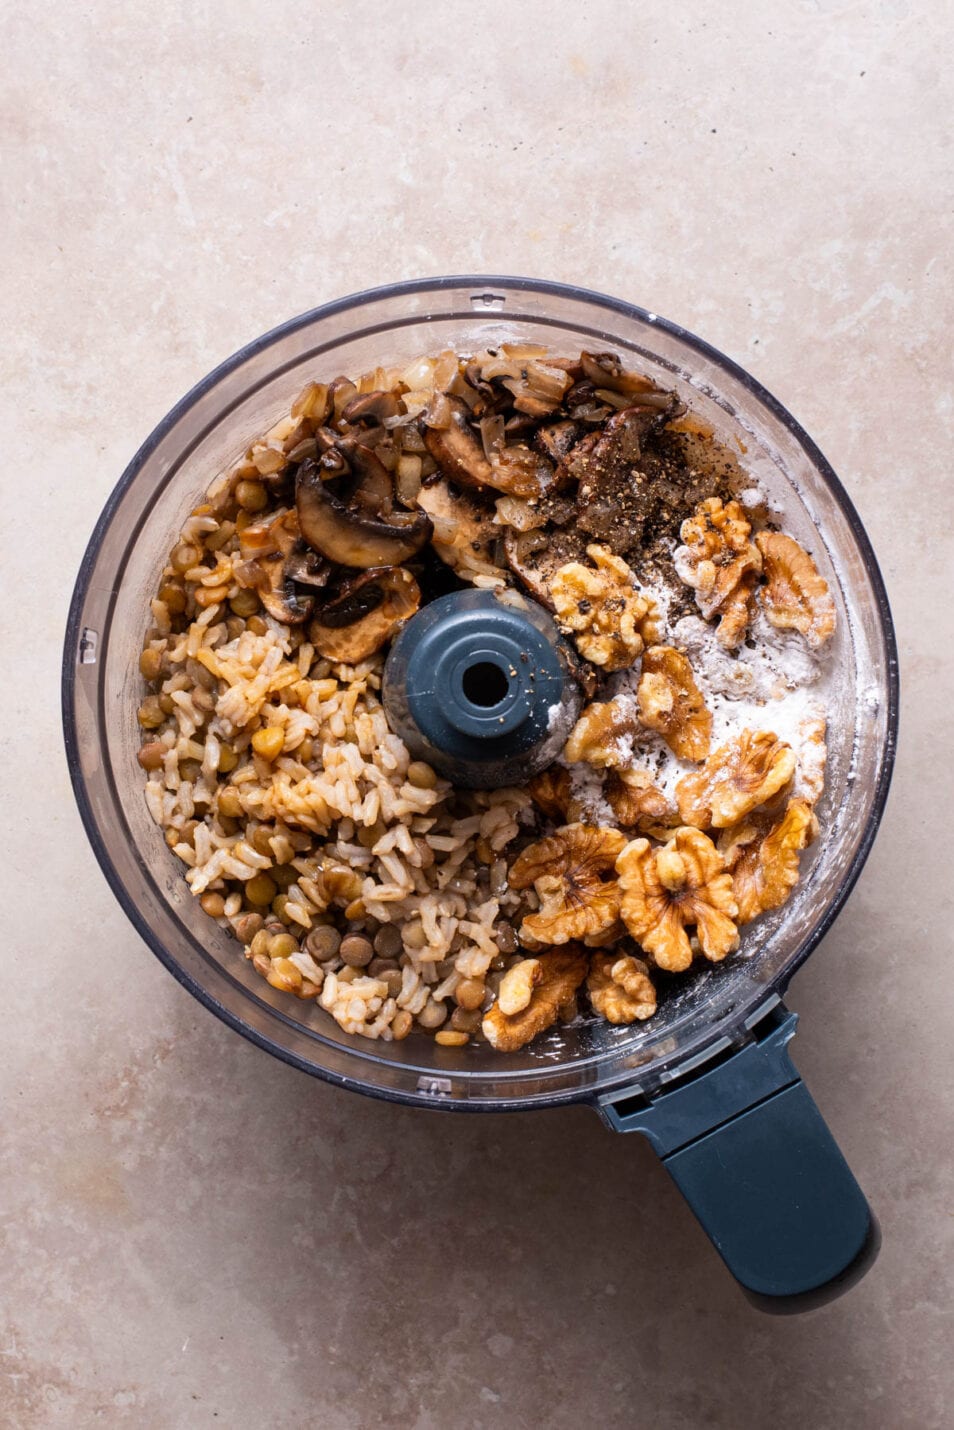 Lentils, brown rice, mushrooms, and walnuts in a food processor.